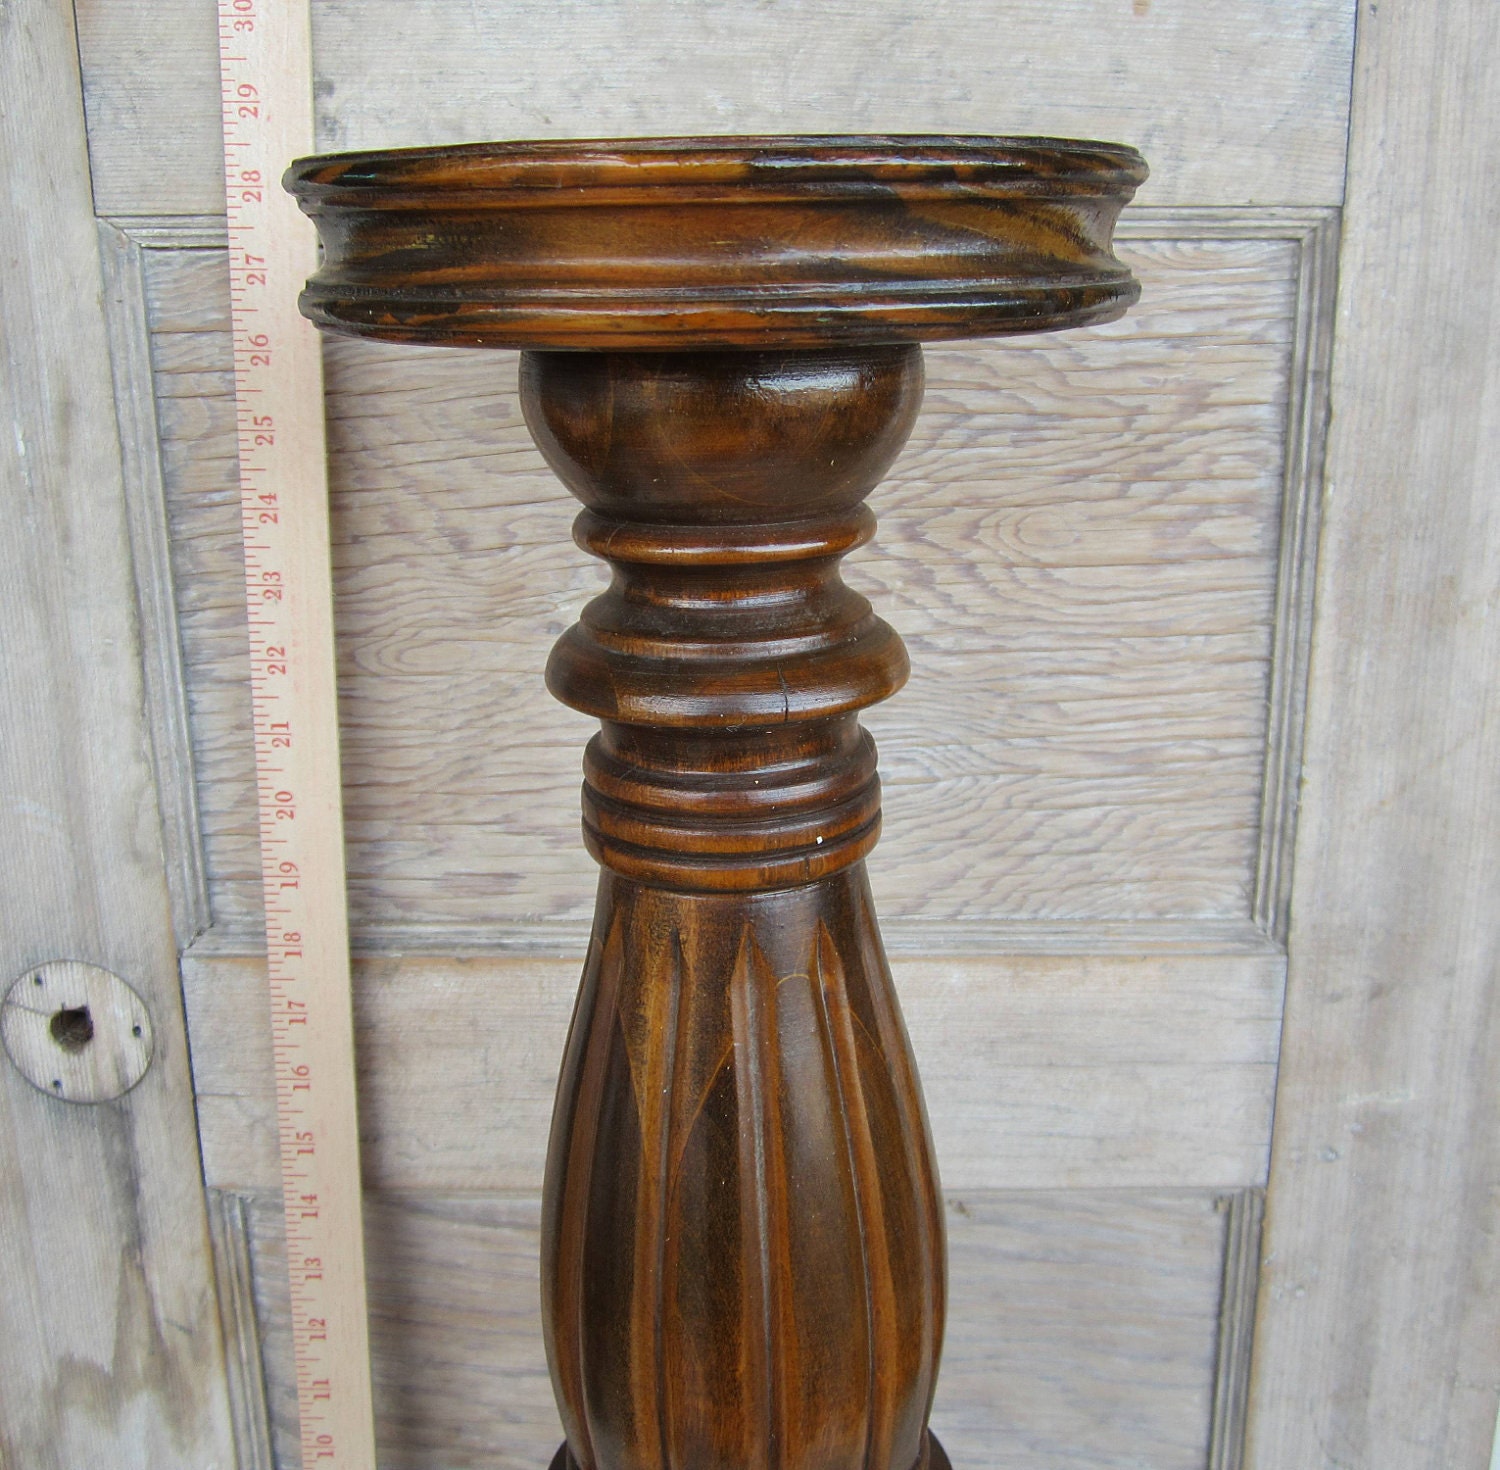 Vintage Wooden Plant Stand Or Candle Holder Very by thejunkman